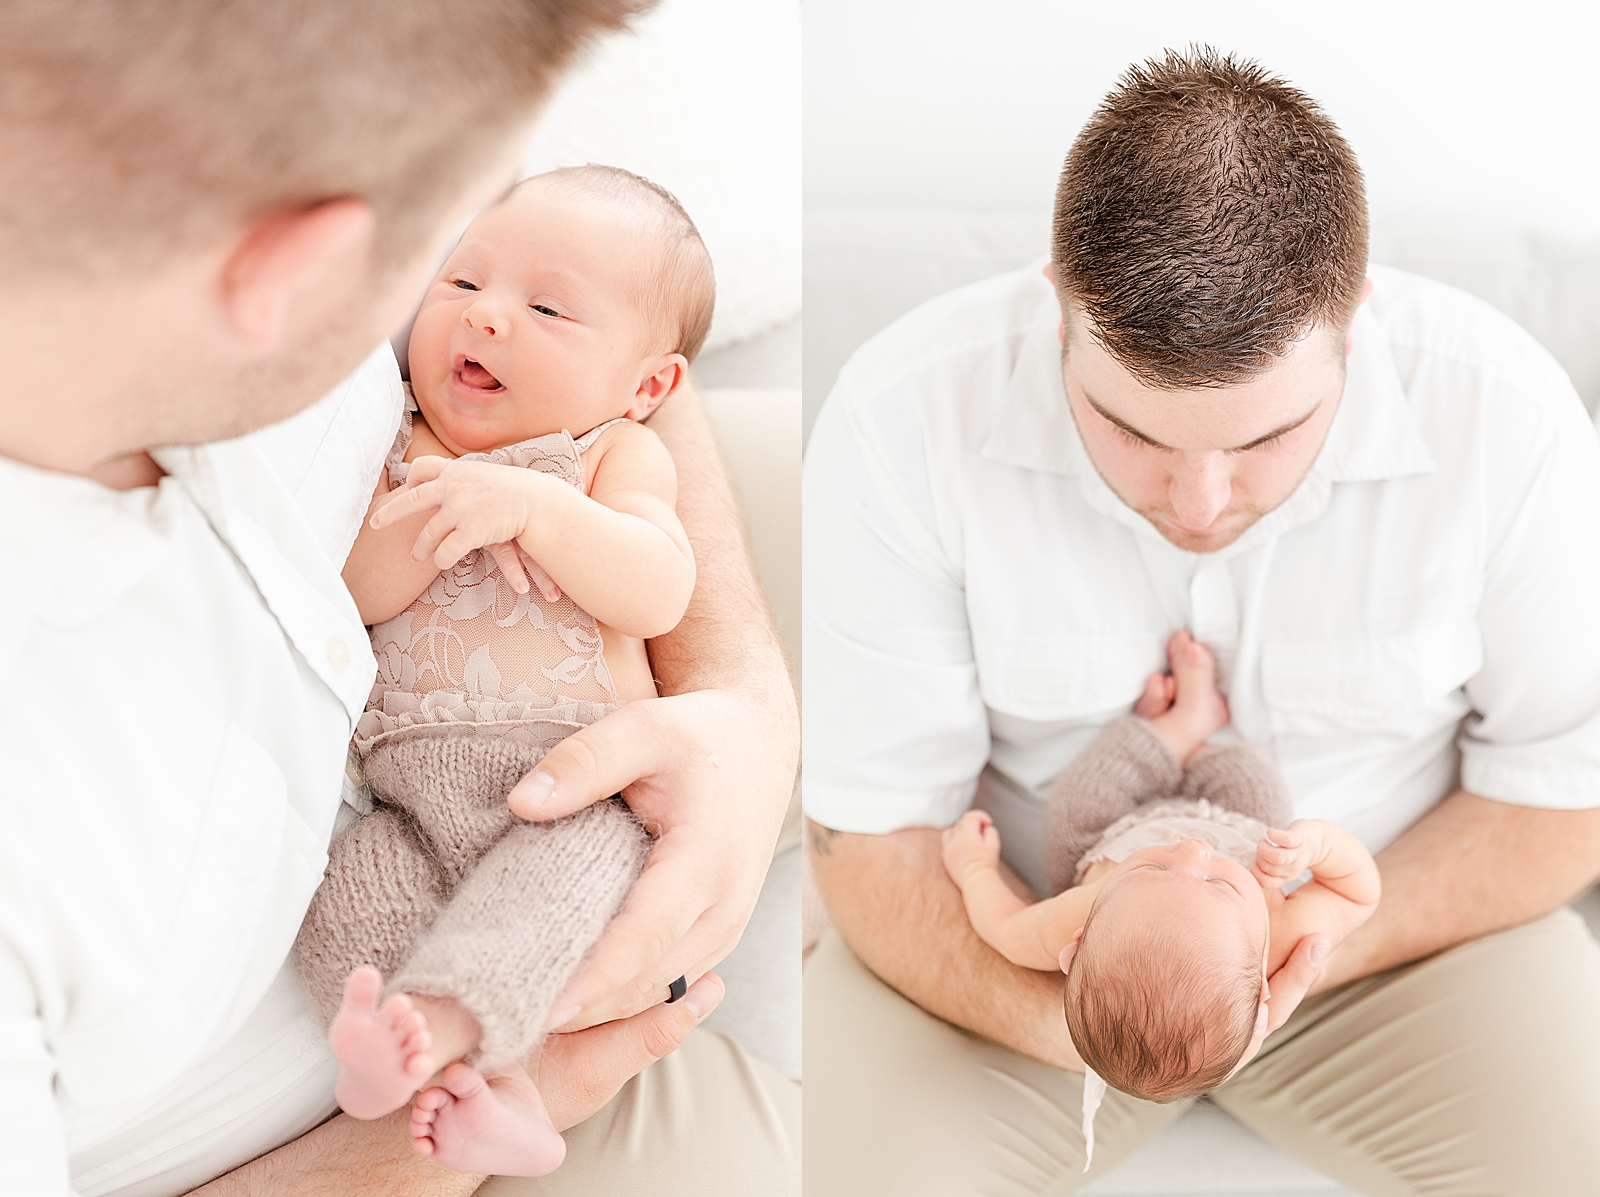 lifestyle newborn session of dad holding baby cradled in his arms while baby smile up at dad and dad sitting on light grey couch holding baby out in front of him looking down at his baby girl wearing a white shirt and tan pants newborn wearing light brown halter lace overalls